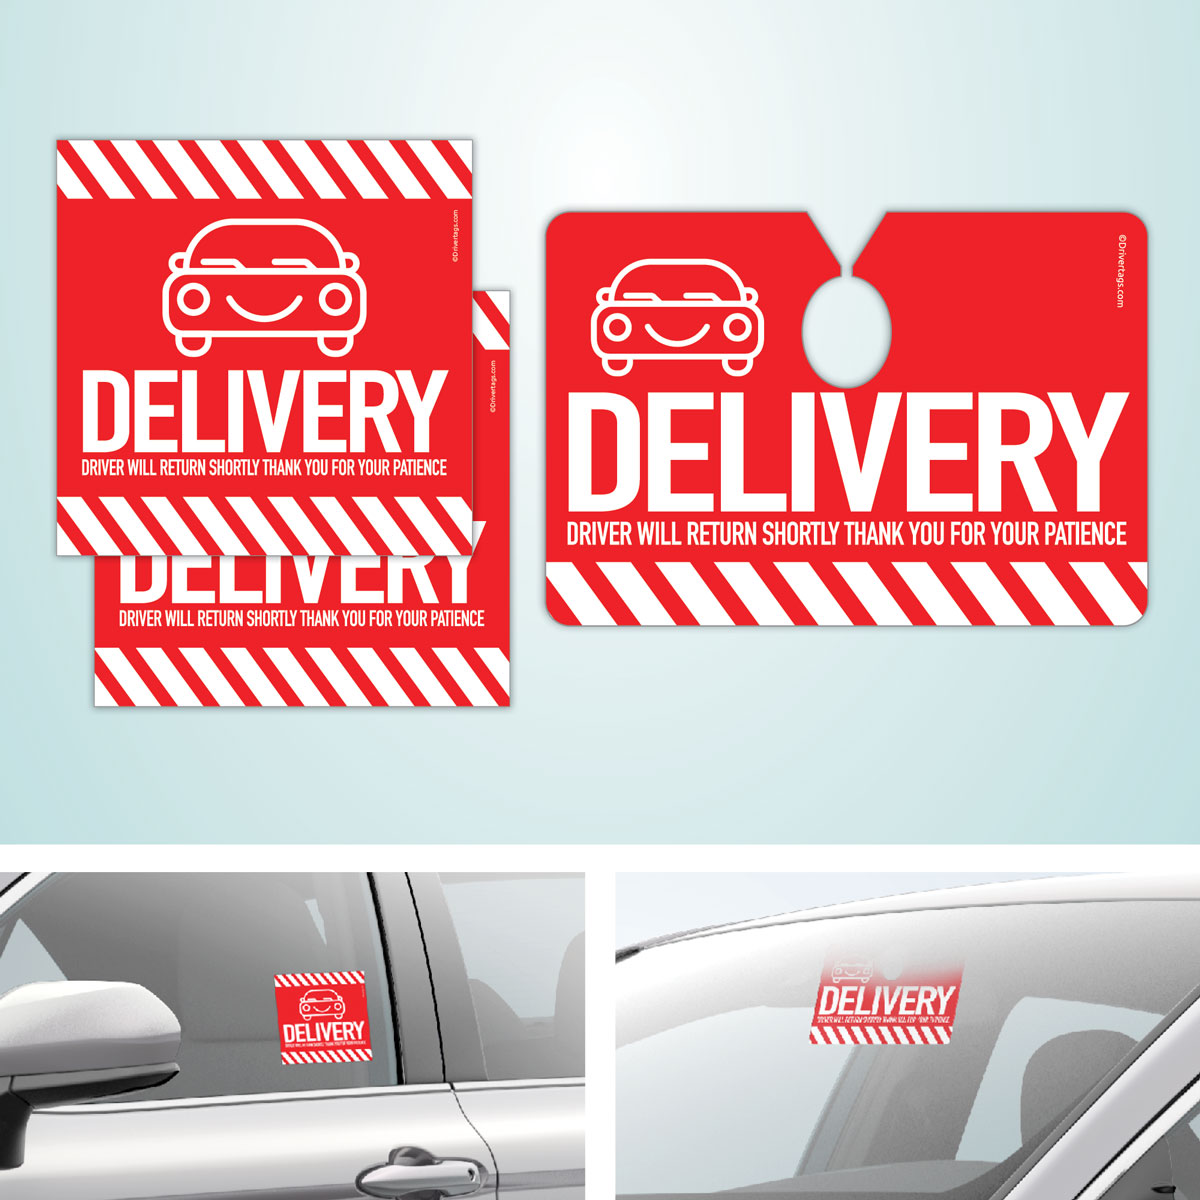 Delivery Signs Drivertags